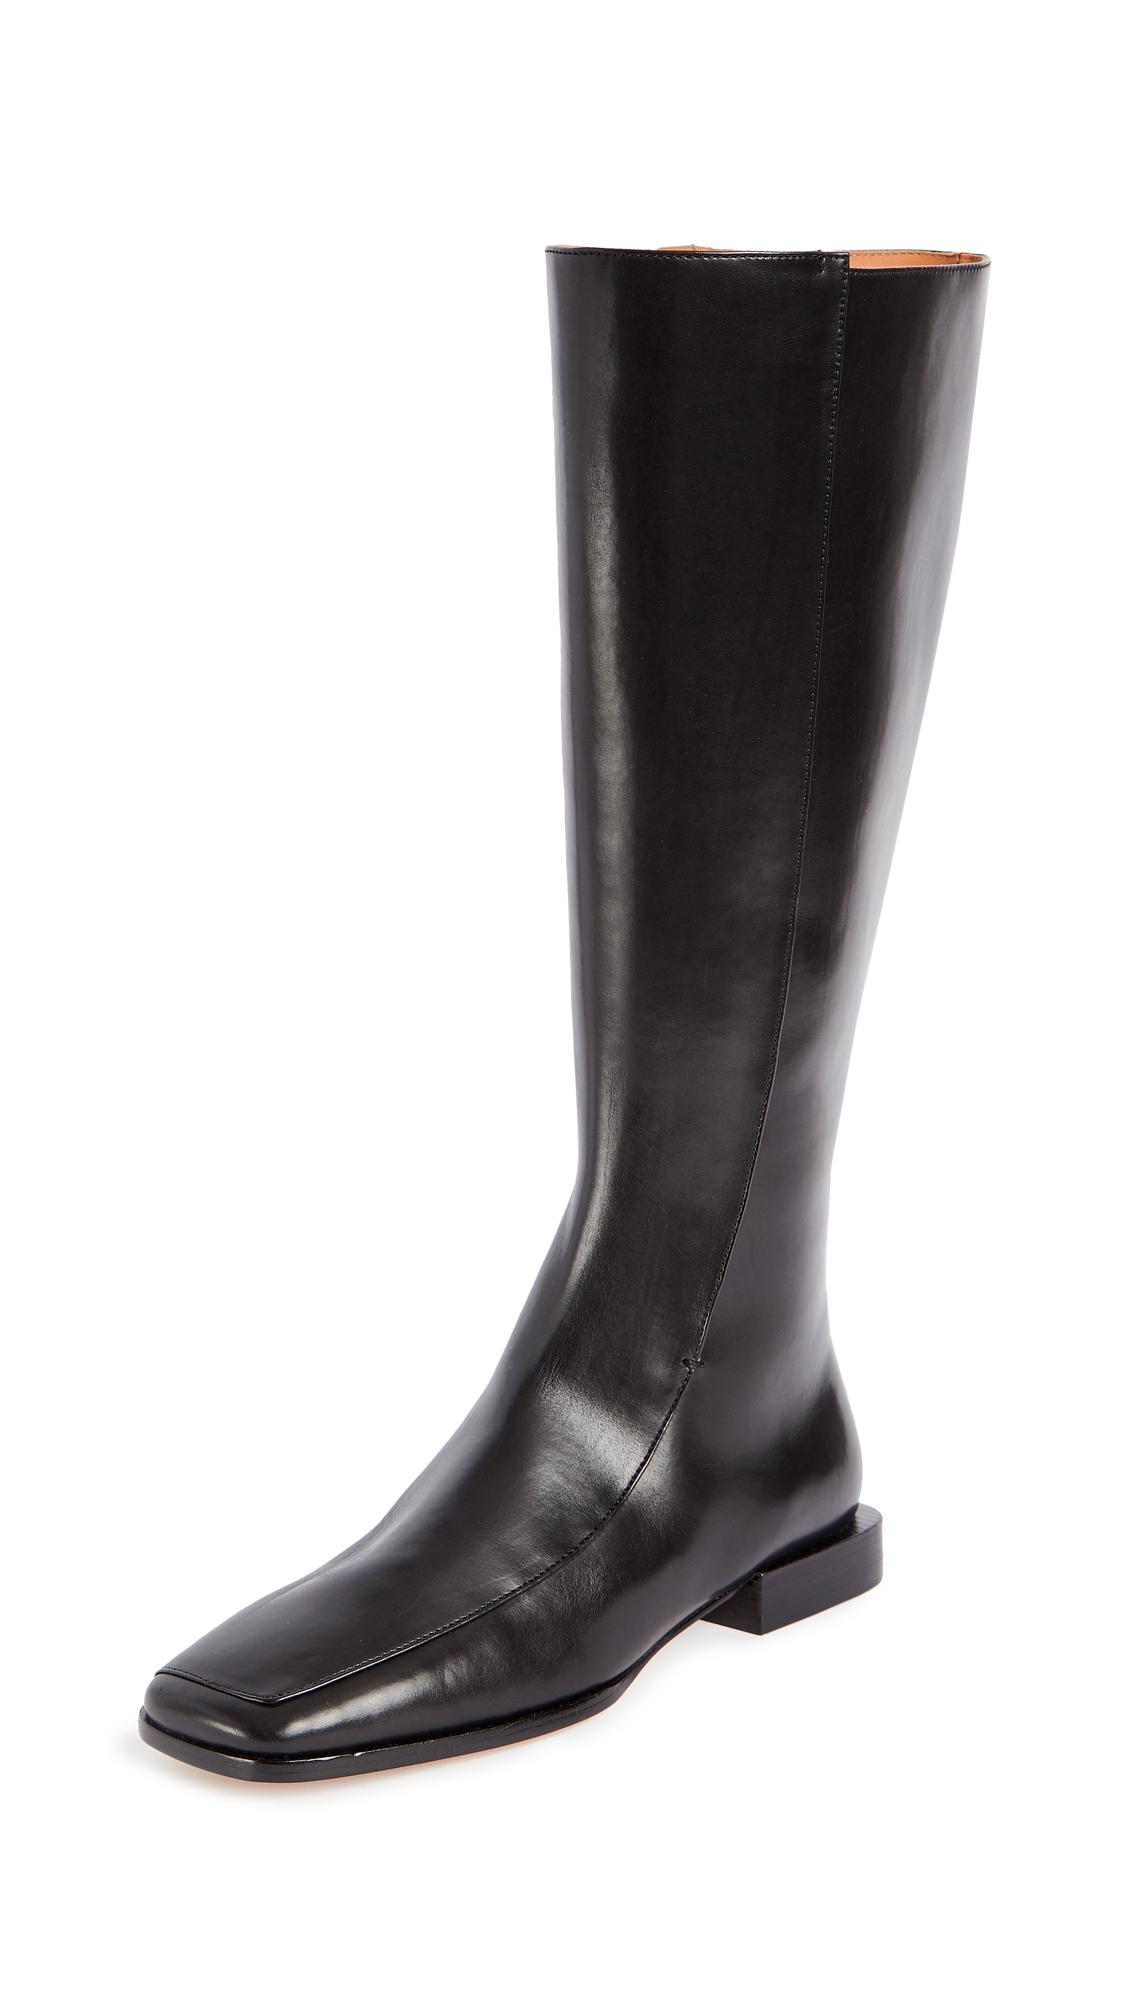 Tory Burch Square Toe 20mm Boots in Black | Lyst